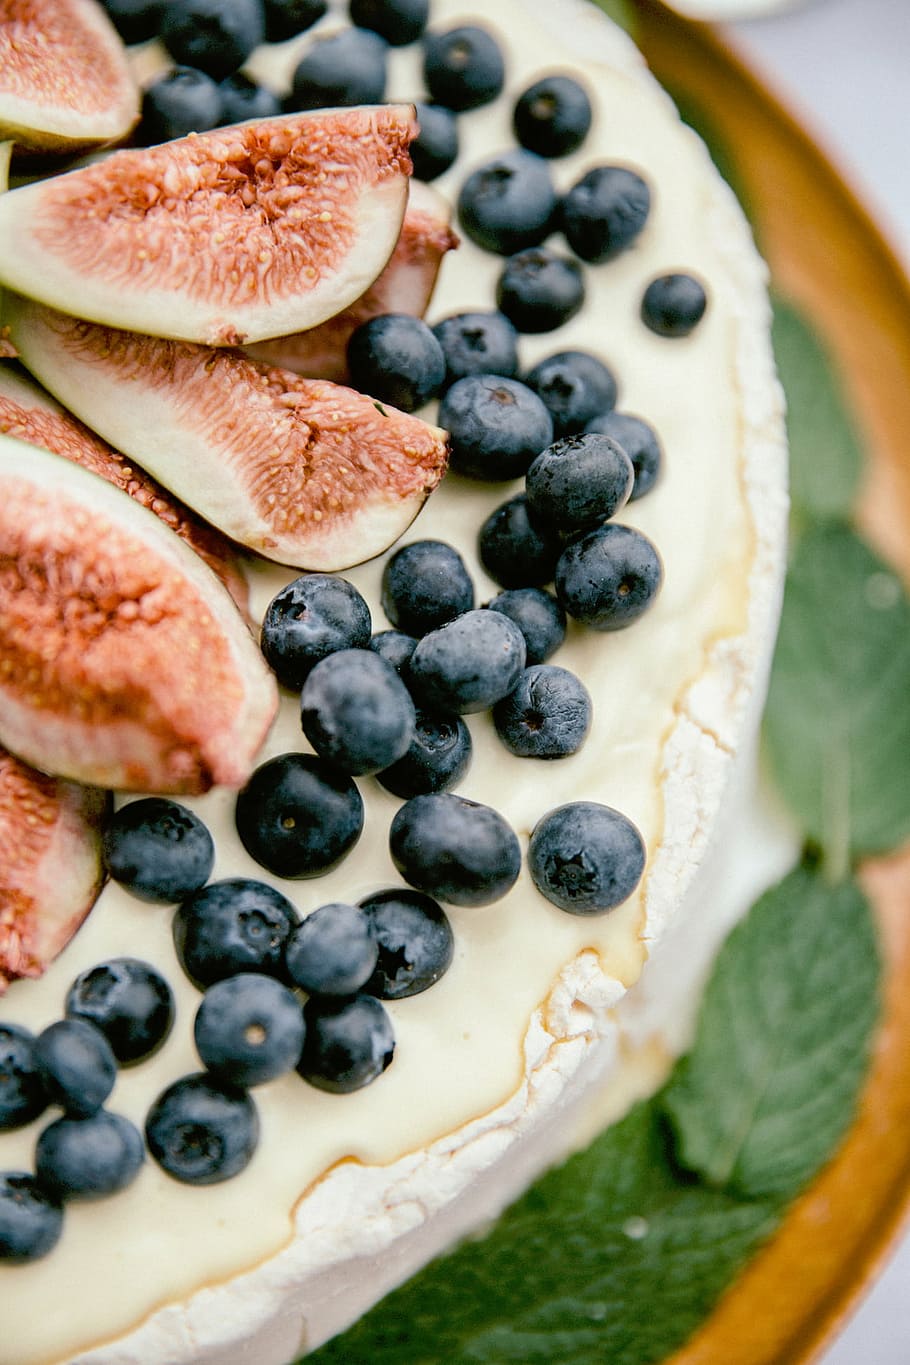 blueberry cheesecake, lifestyle, food, desserts, sweets, fruits, cake, cream, berries, fruit